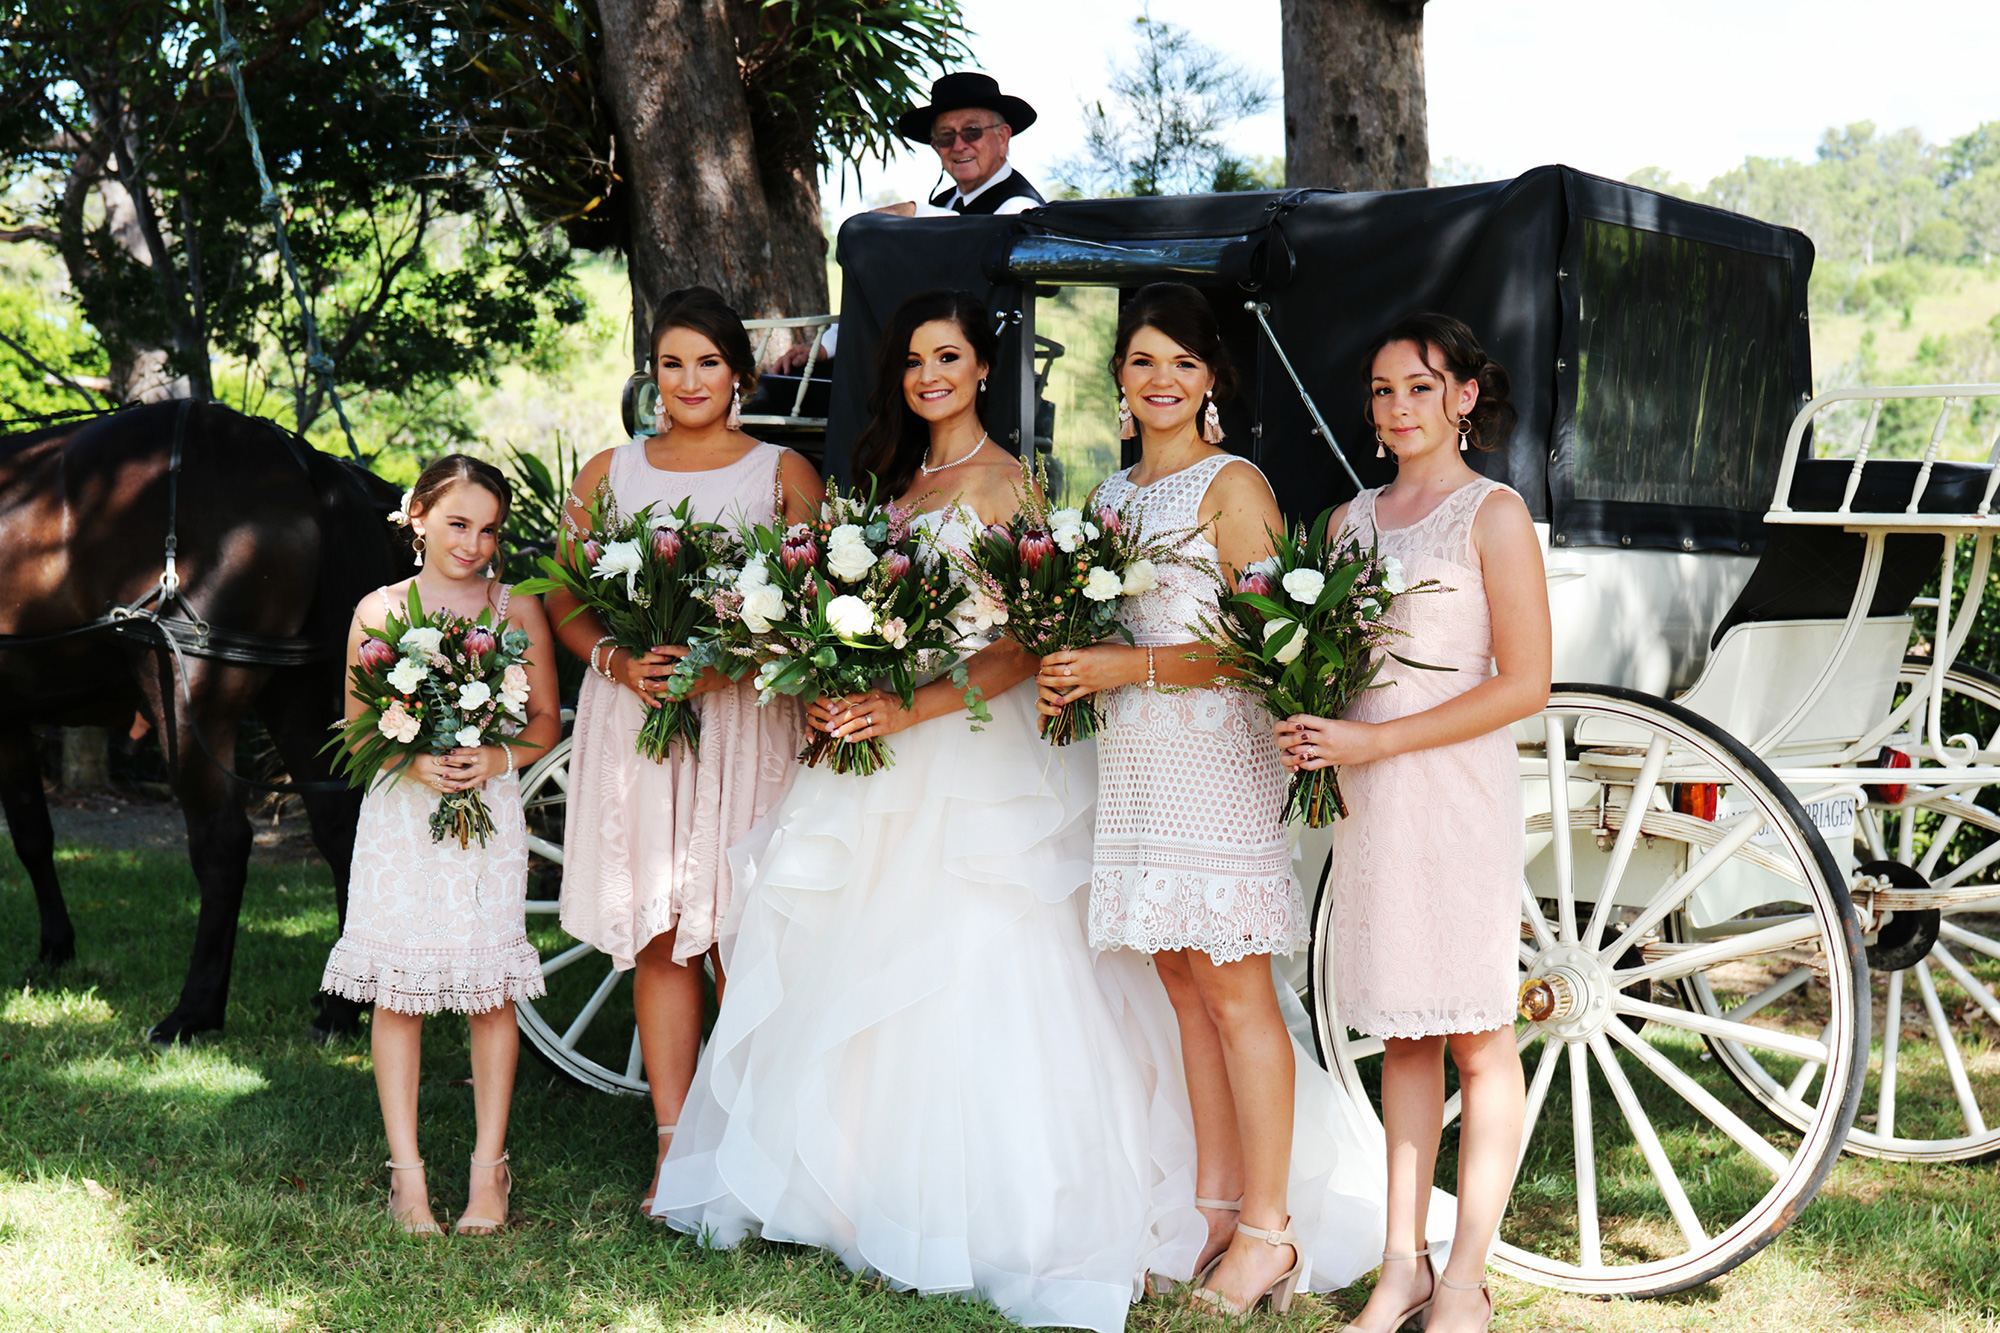 Kirsty_Cameron_Rustic-Country-Wedding_Christine-Anne-Photography_024